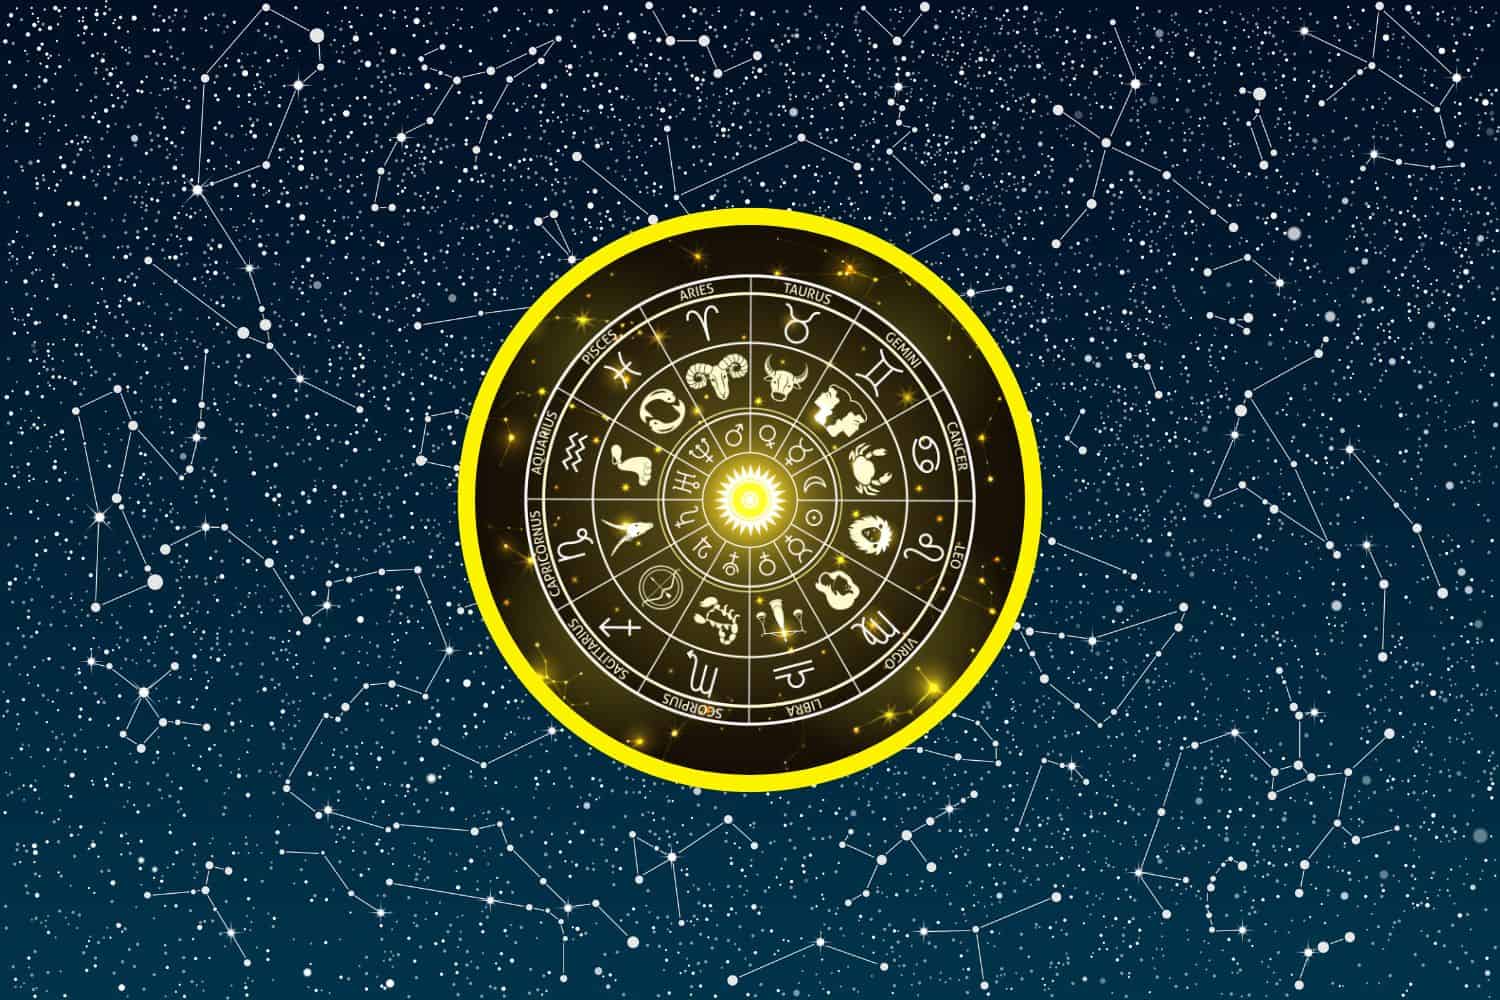 Horoscope Today, 14 March 2023 - Get Astrology Today For Your Zodiac Sign